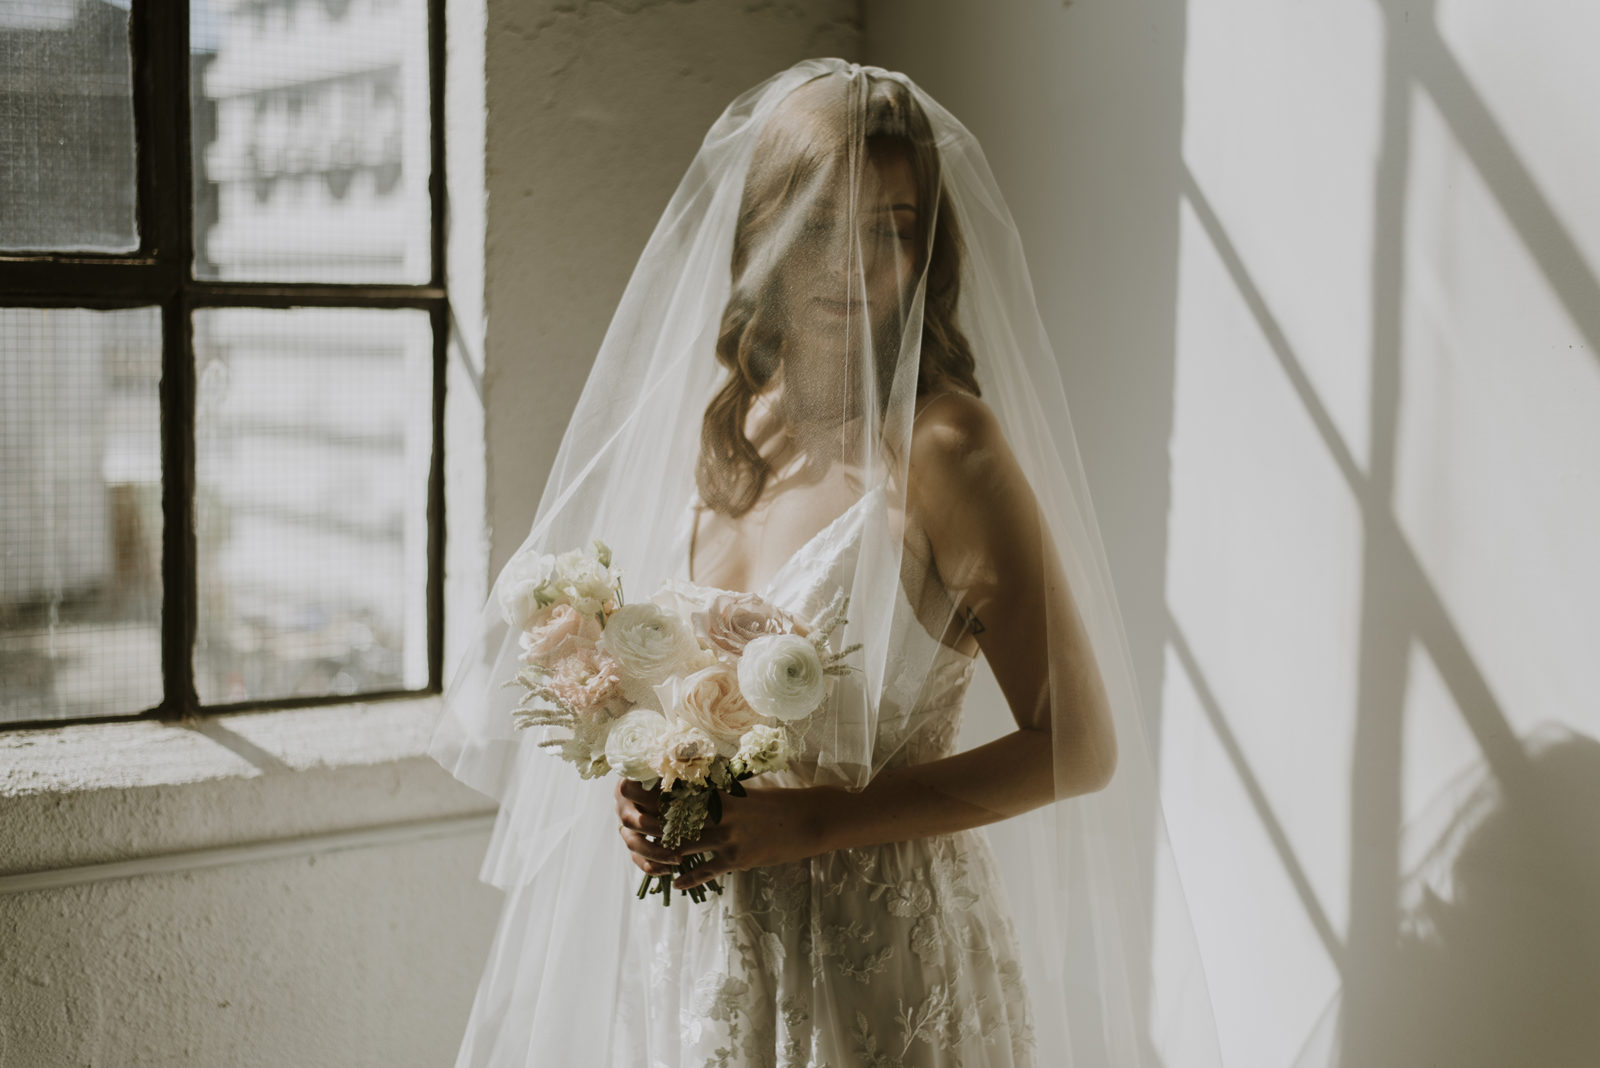 Bringing Back the Flower Crown: Organic & Ethereal meets industrial boho // Bridal Inspiration Shoot - on Bronte Bride, boho, ethereal, bohemian, bridal veil